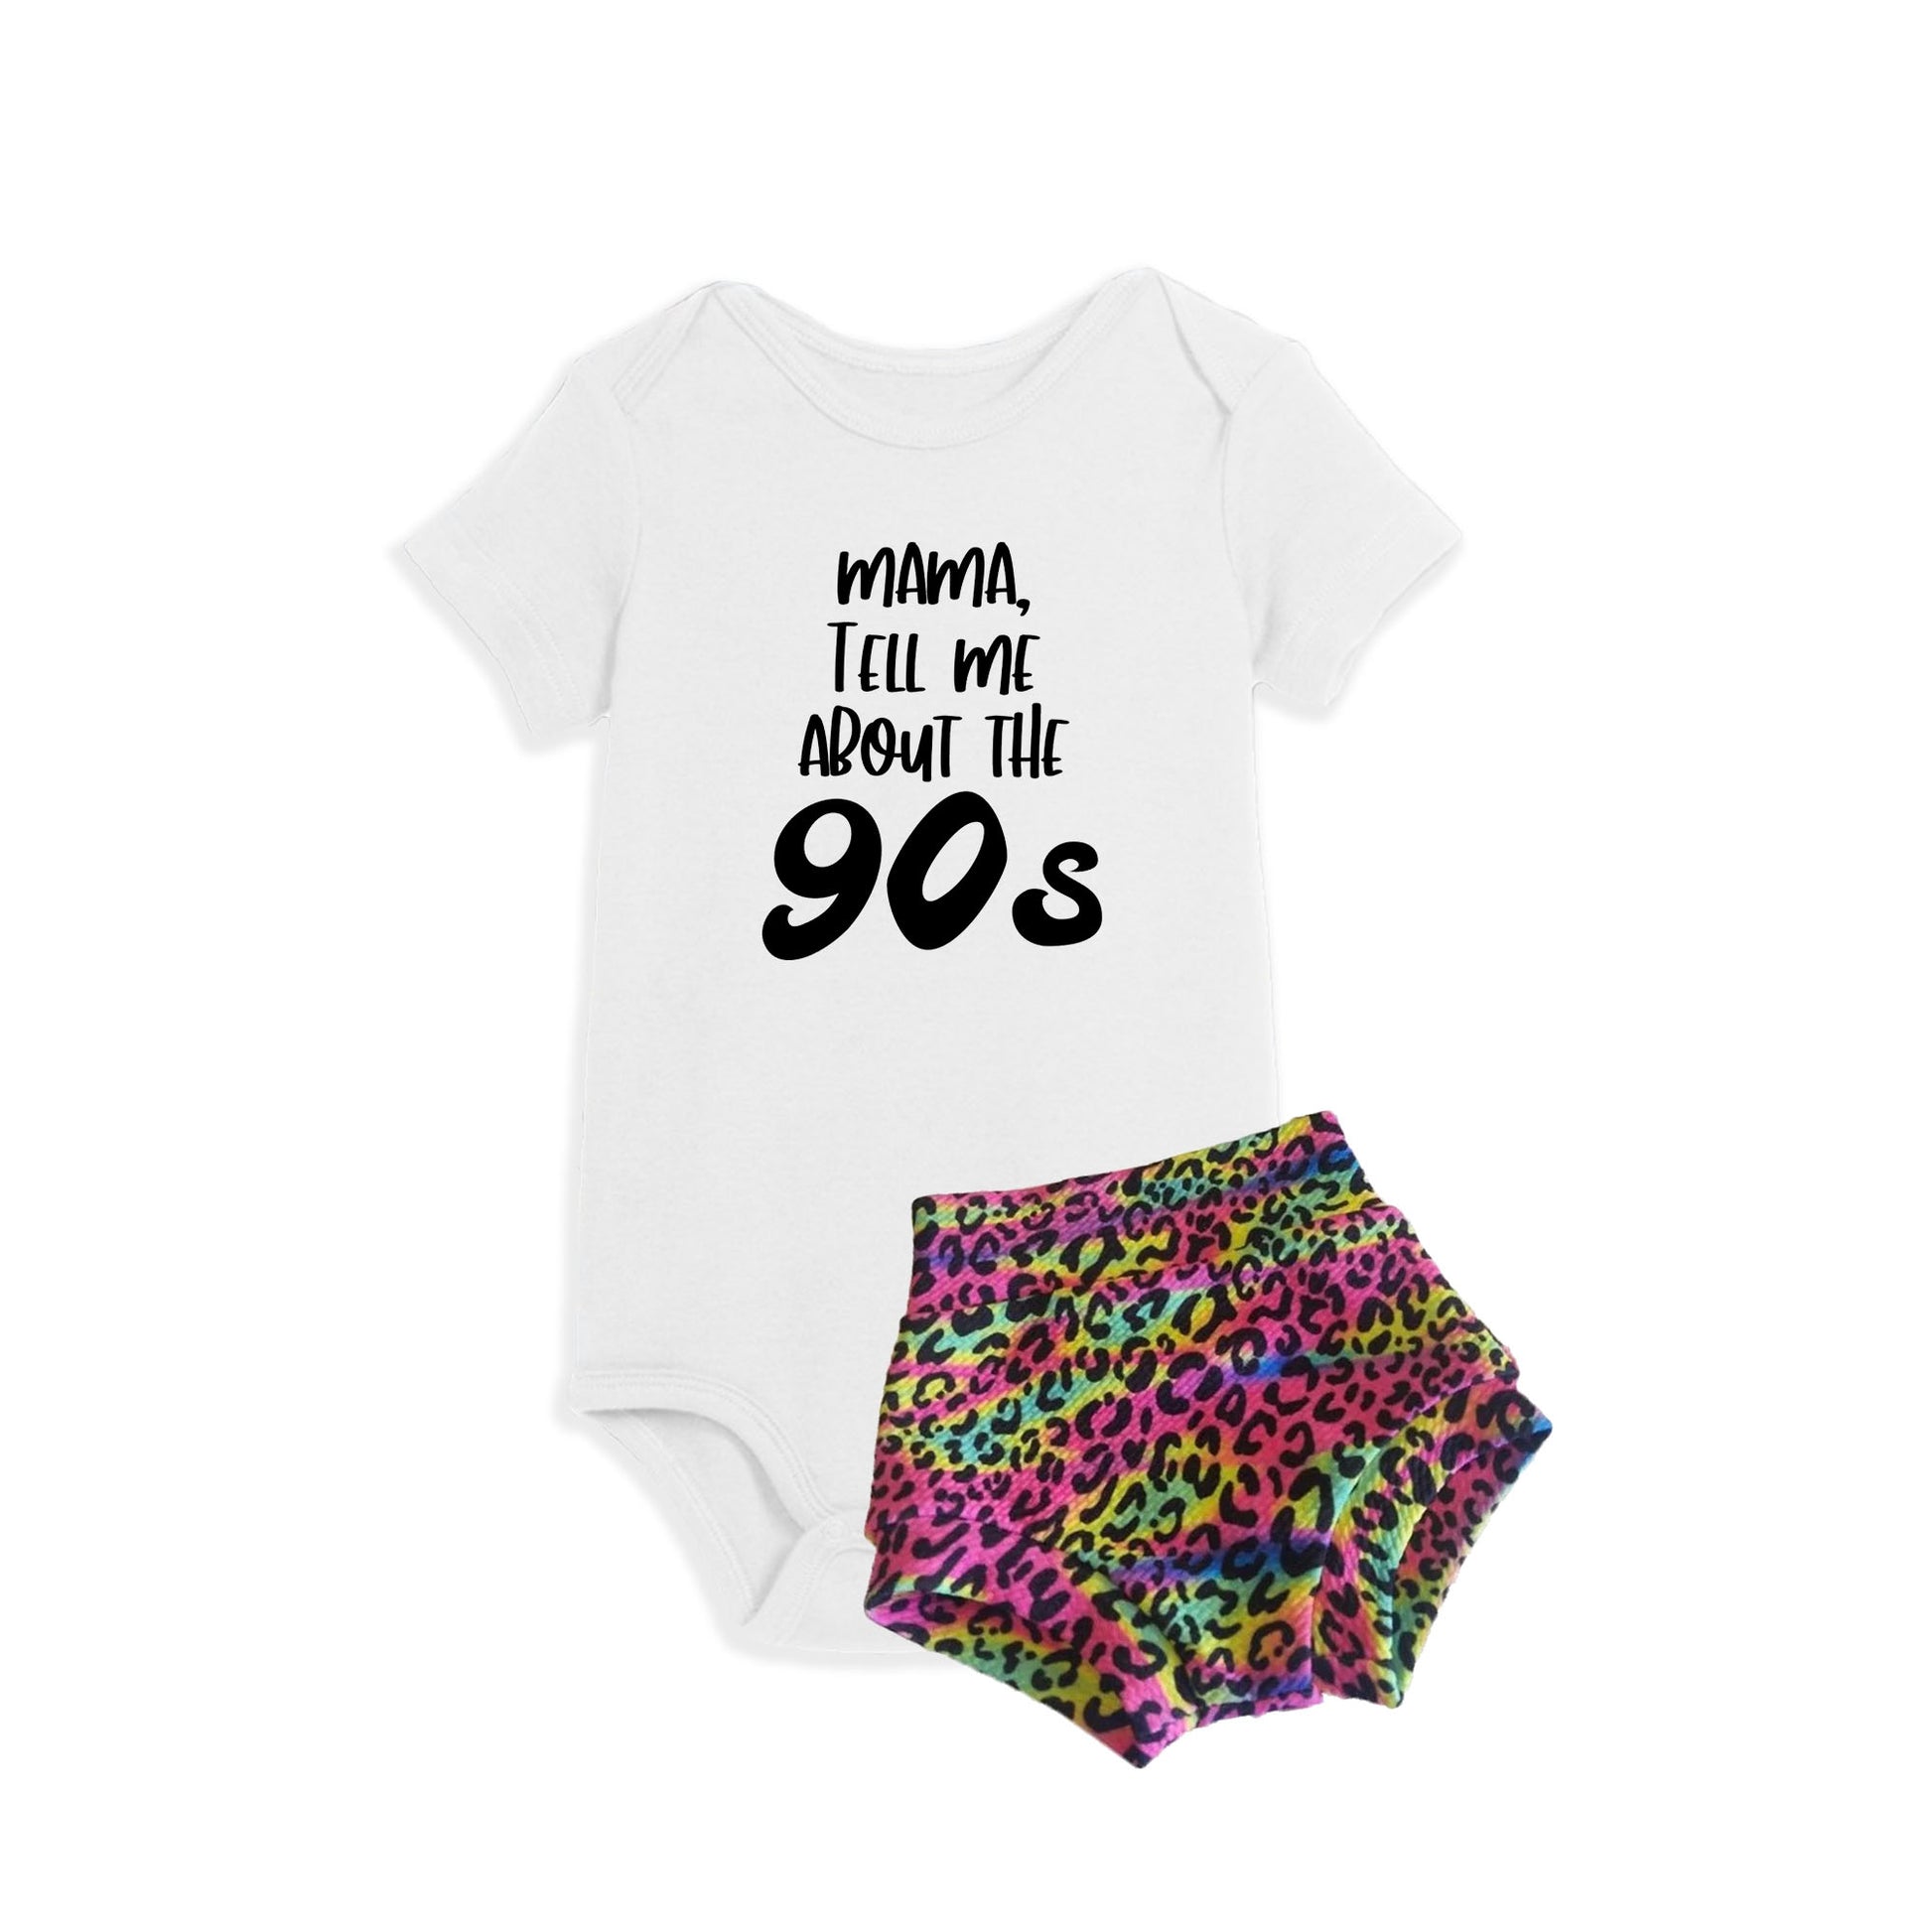 90s bodysuit, 90s bodysuit Suppliers and Manufacturers at